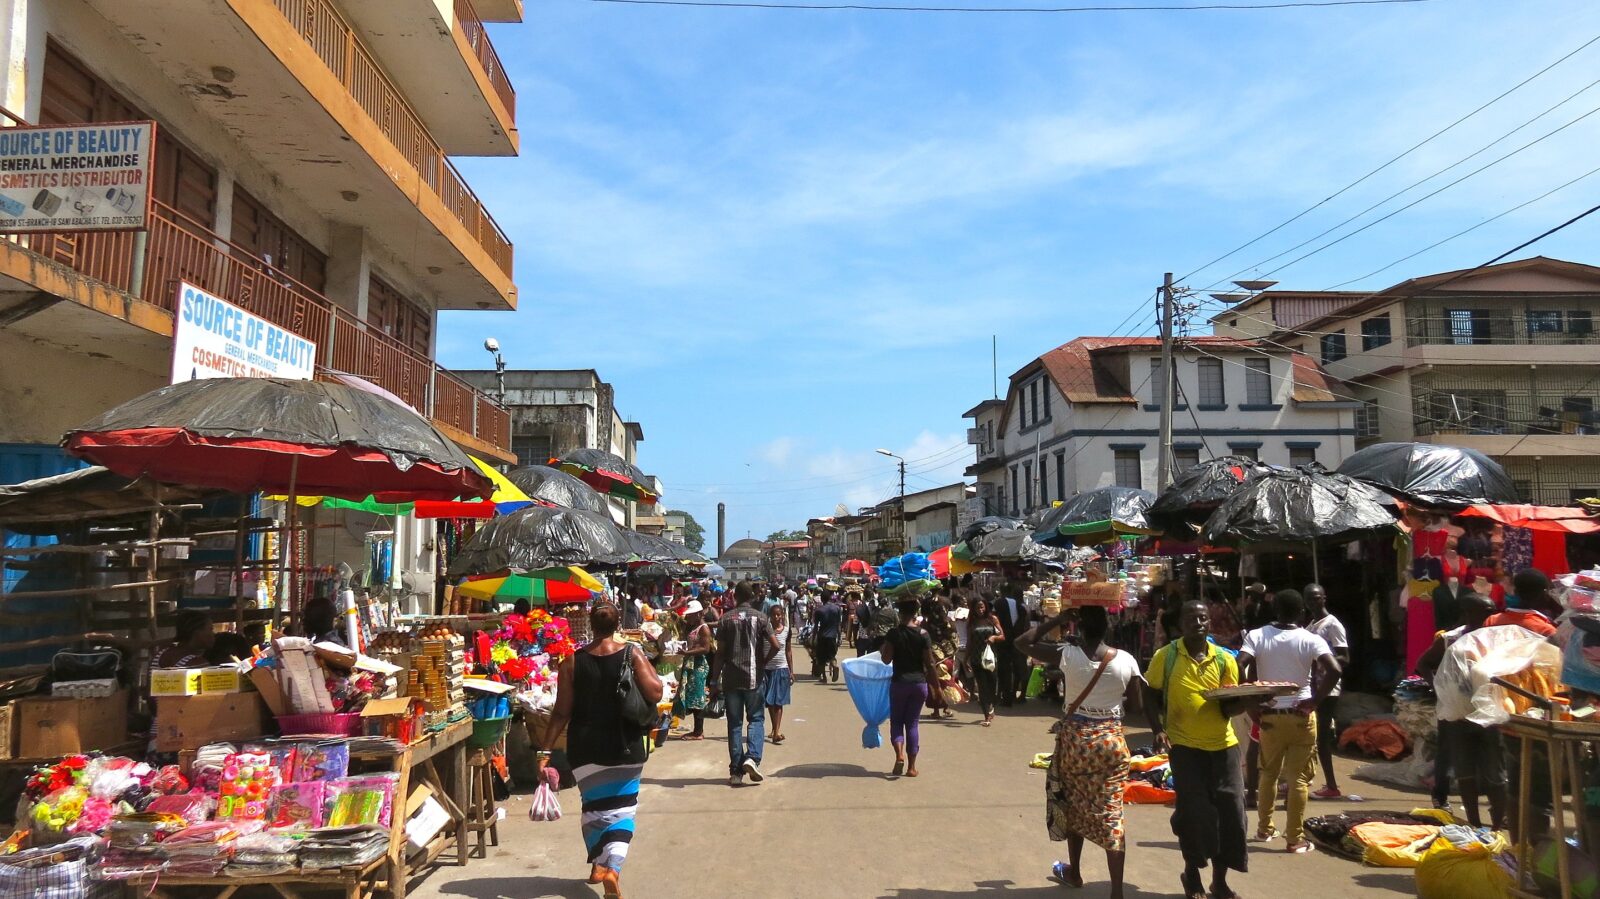 Wander the vibrant streets of Freetown, where bustling markets, colorful buildings, and lively music create a tapestry of urban life in Sierra Leone. #FreetownVibes #SierraLeone. Photo Credits: Erik Cleves Kristensen